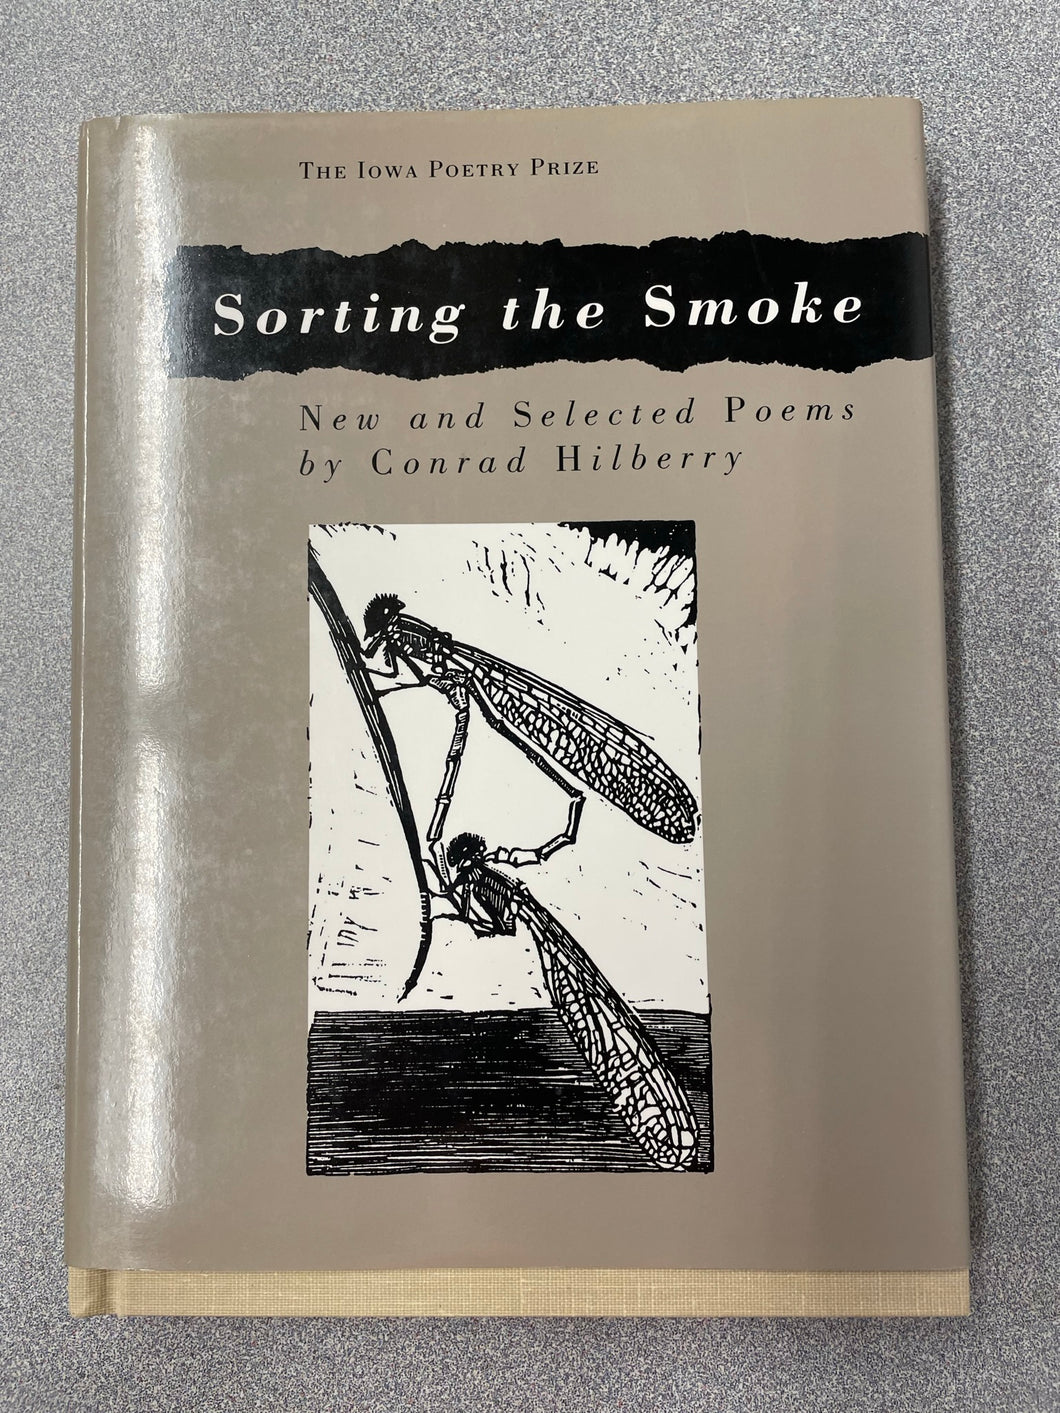 Sorting the Smoke: New and Selected Poems by Conrad Hilberry [1990] P 5/23